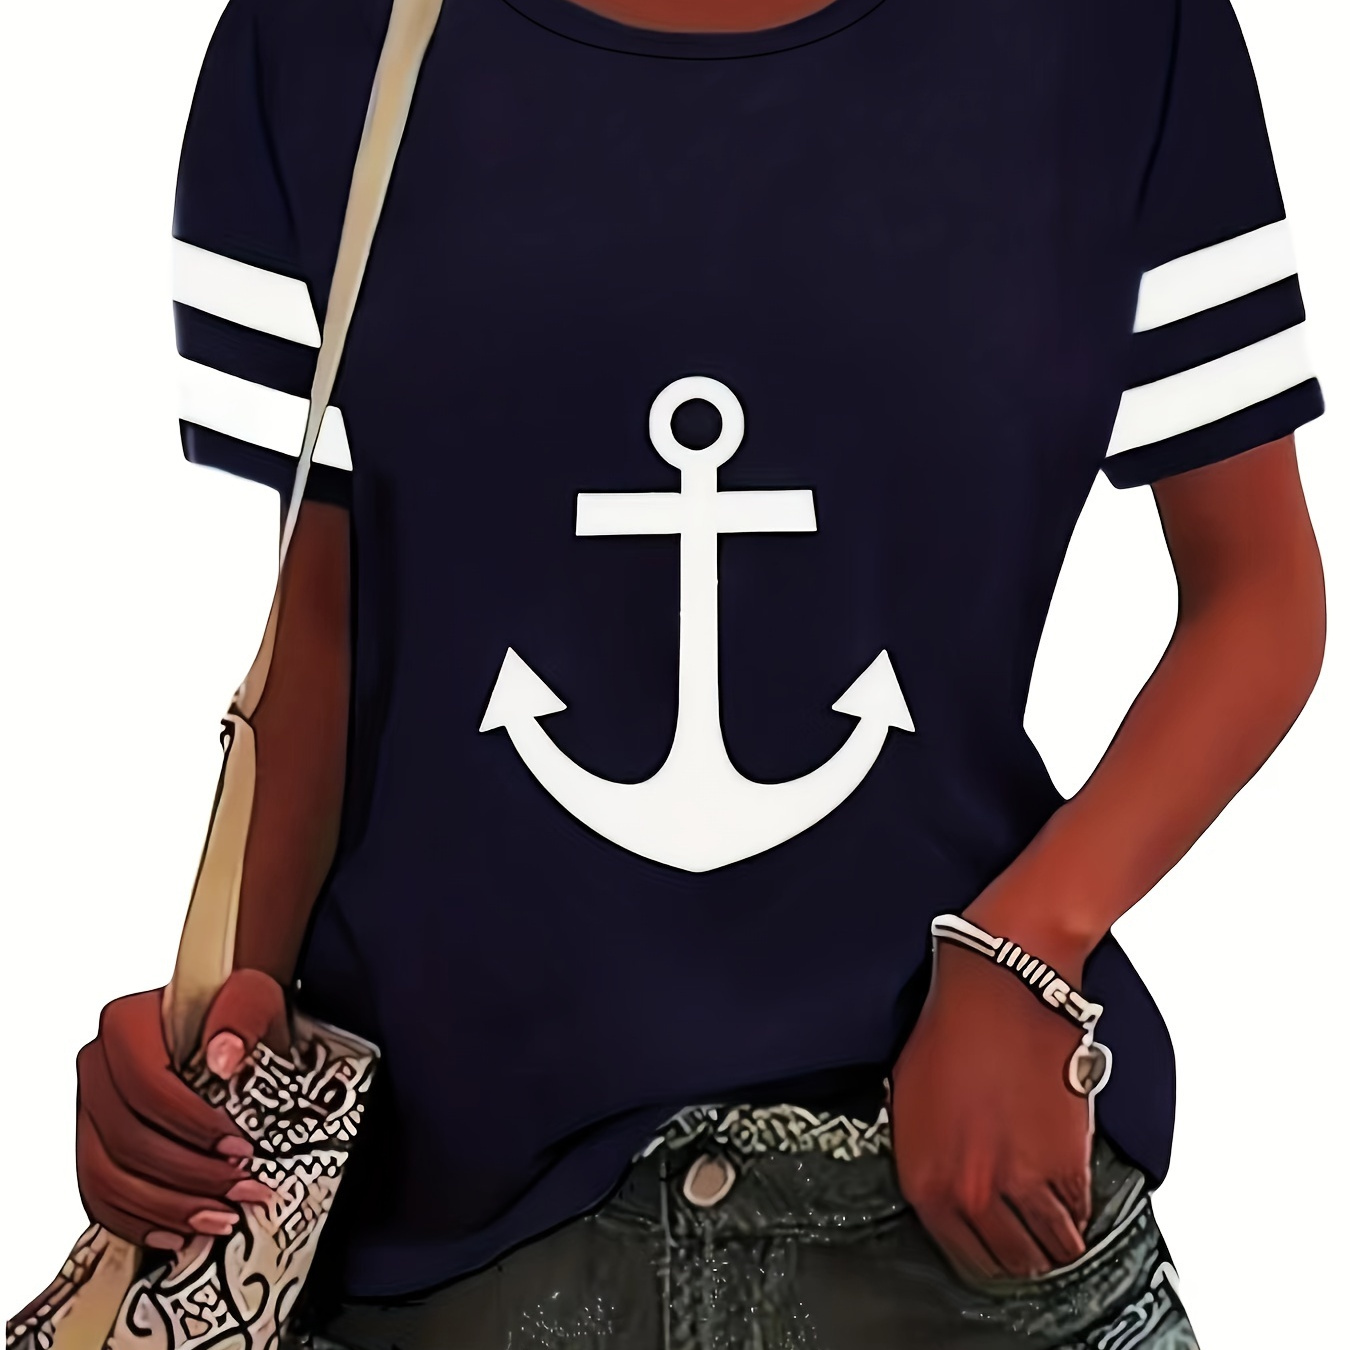 

Anchor Print Crew Neck T-shirt, Casual Short Sleeve Top For Spring & Summer, Women's Clothing